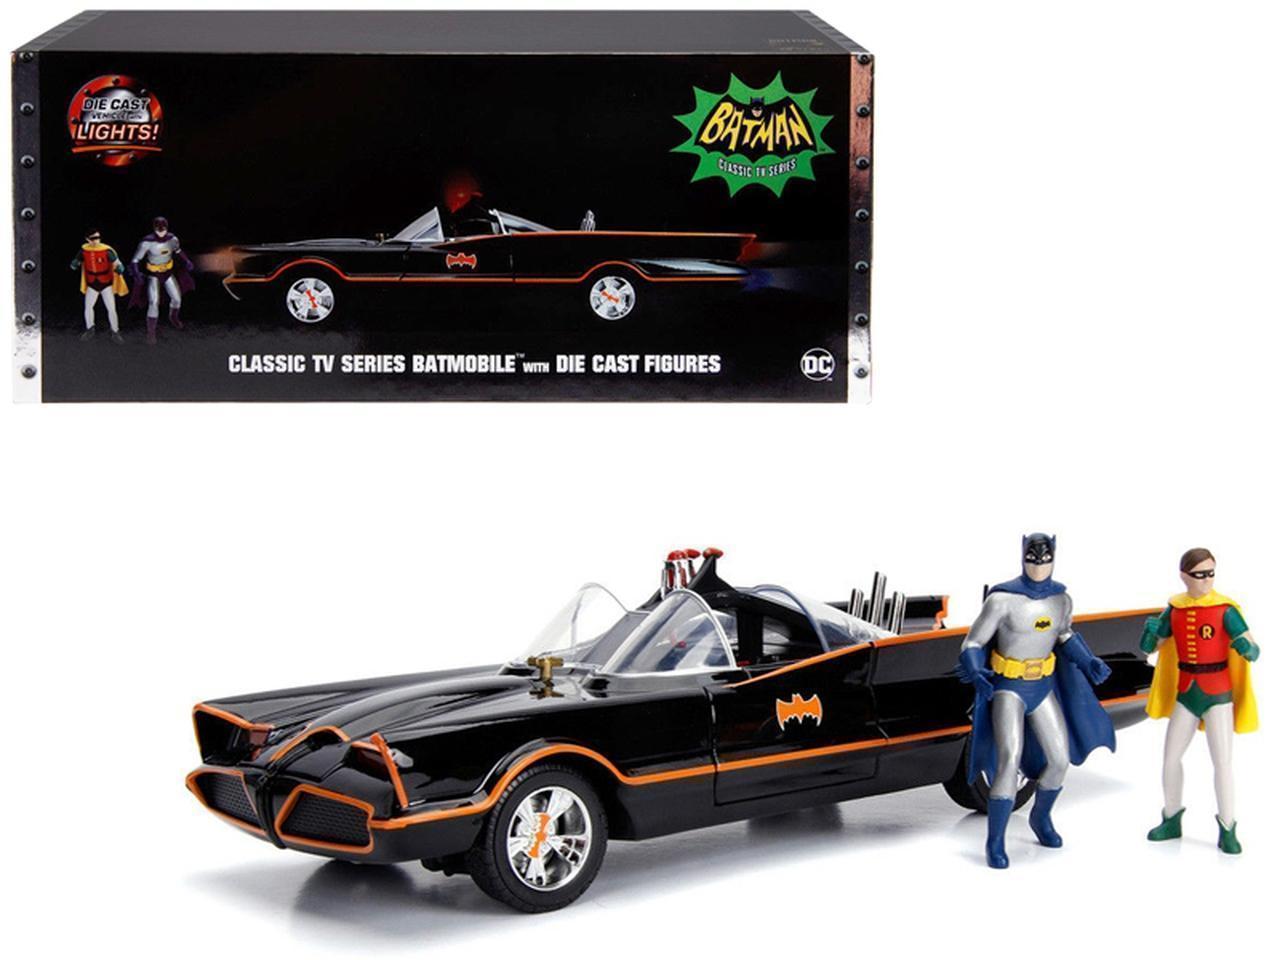 1966 Classic TV Series Batmobile With Die Cast Batman and Robin Figures "80 Years of Batman" 1:18 Scale Model Car